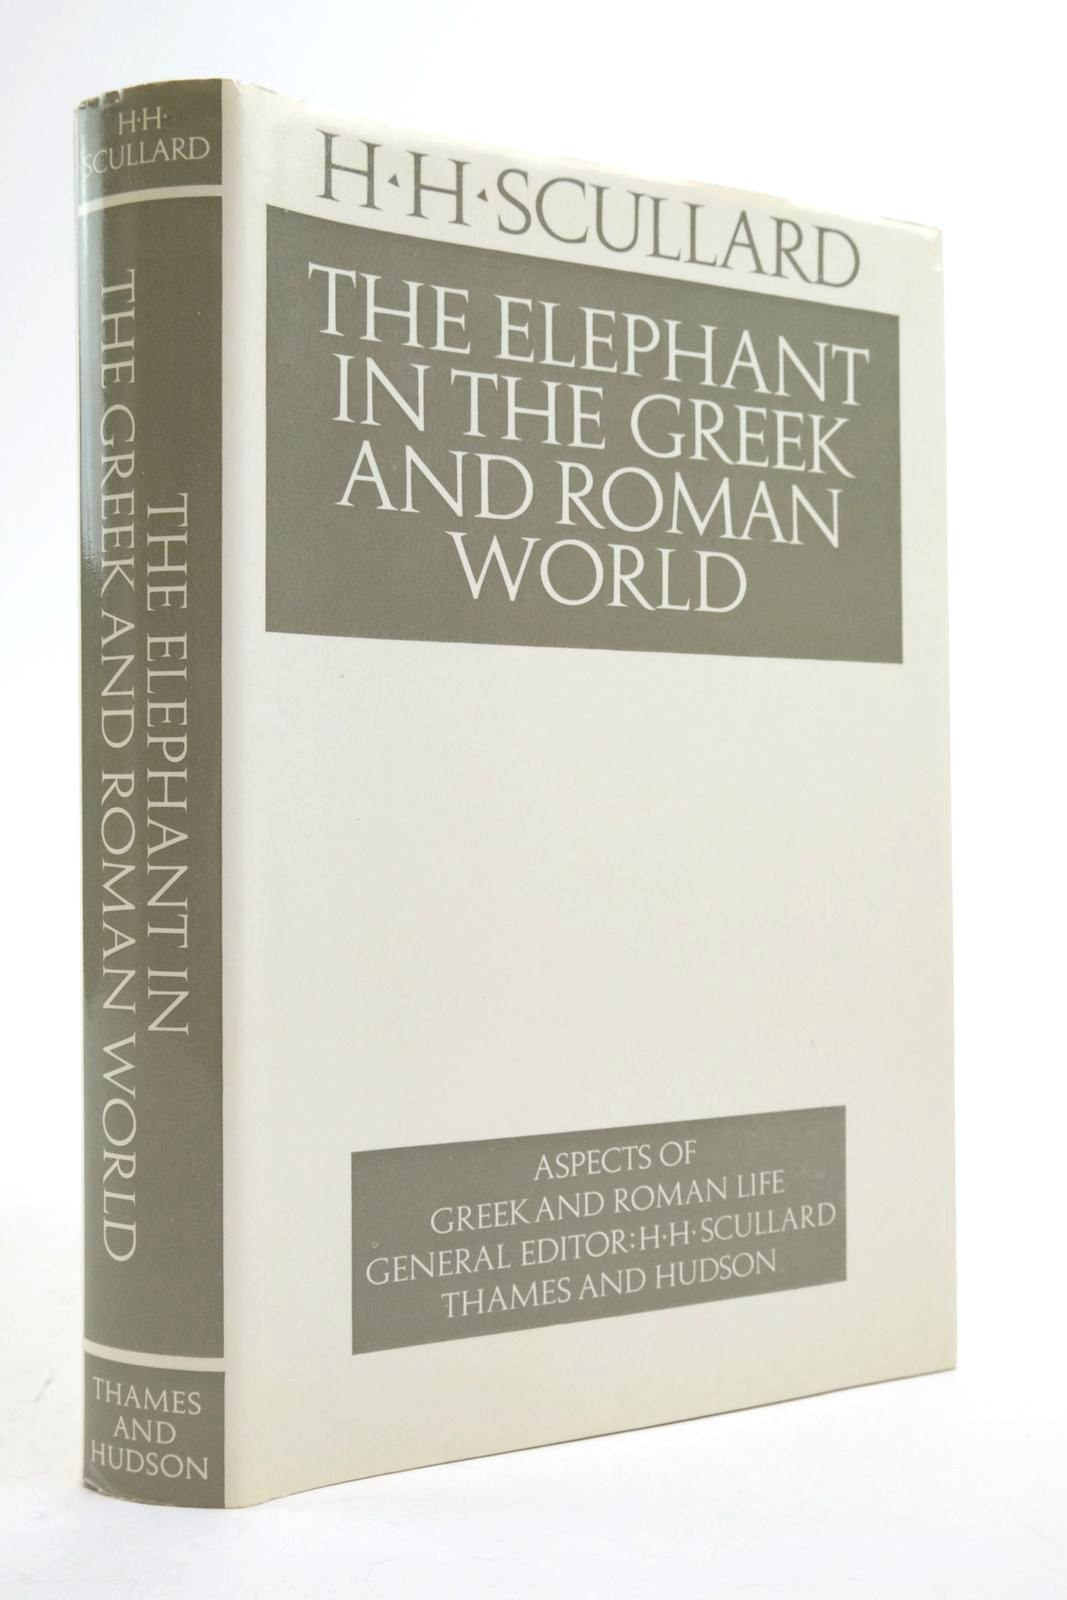 Photo of THE ELEPHANT IN THE GREEK AND ROMAN WORLD written by Scullard, H.H. published by Thames and Hudson (STOCK CODE: 2138803)  for sale by Stella & Rose's Books